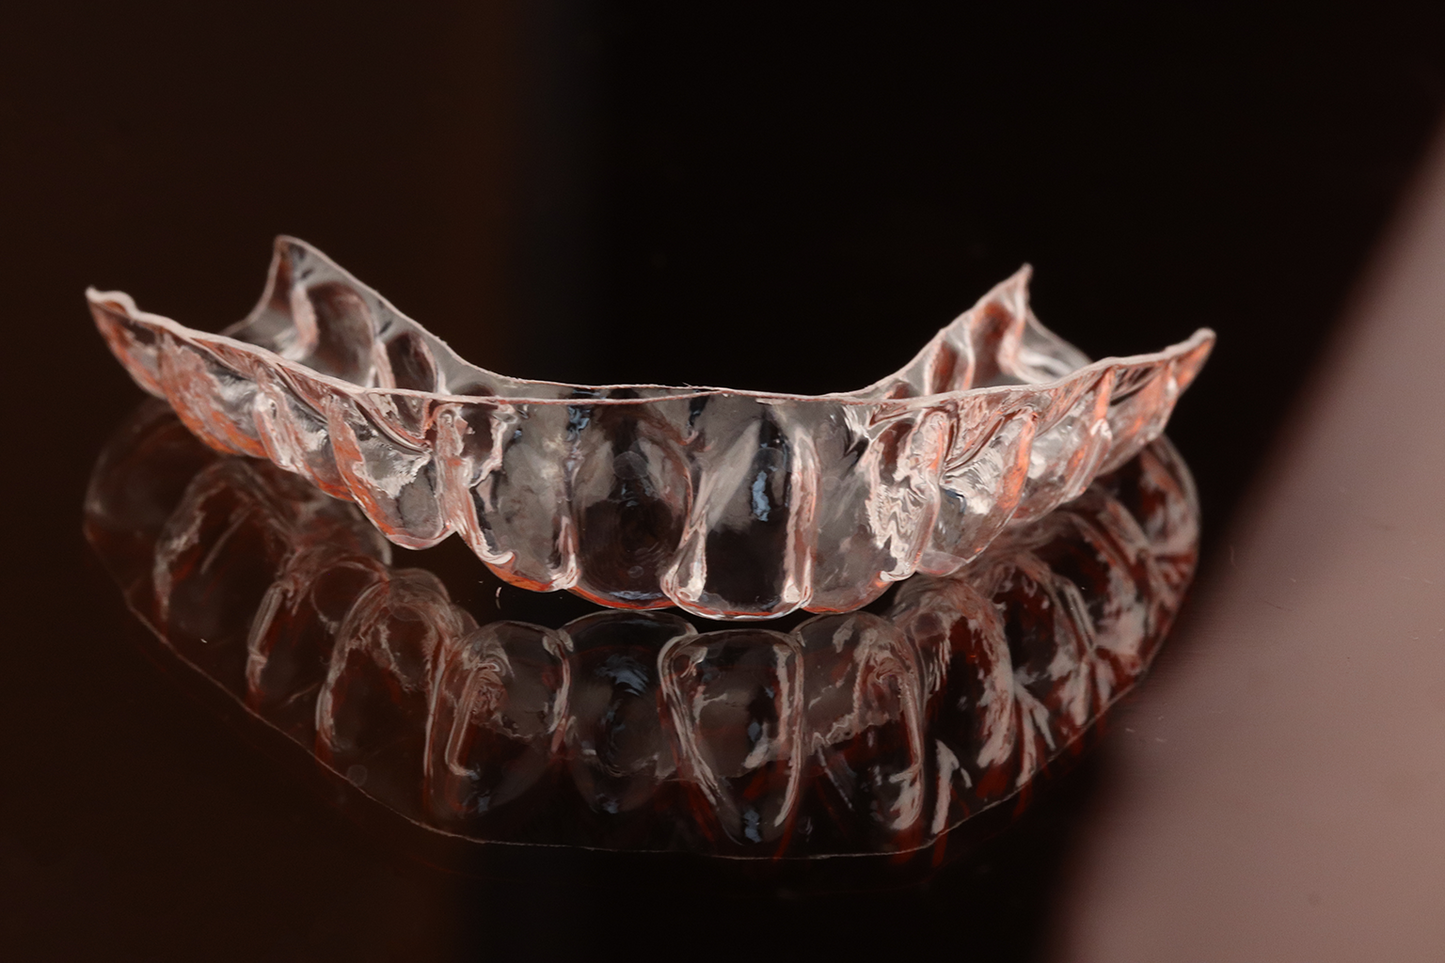 Production of the aligners